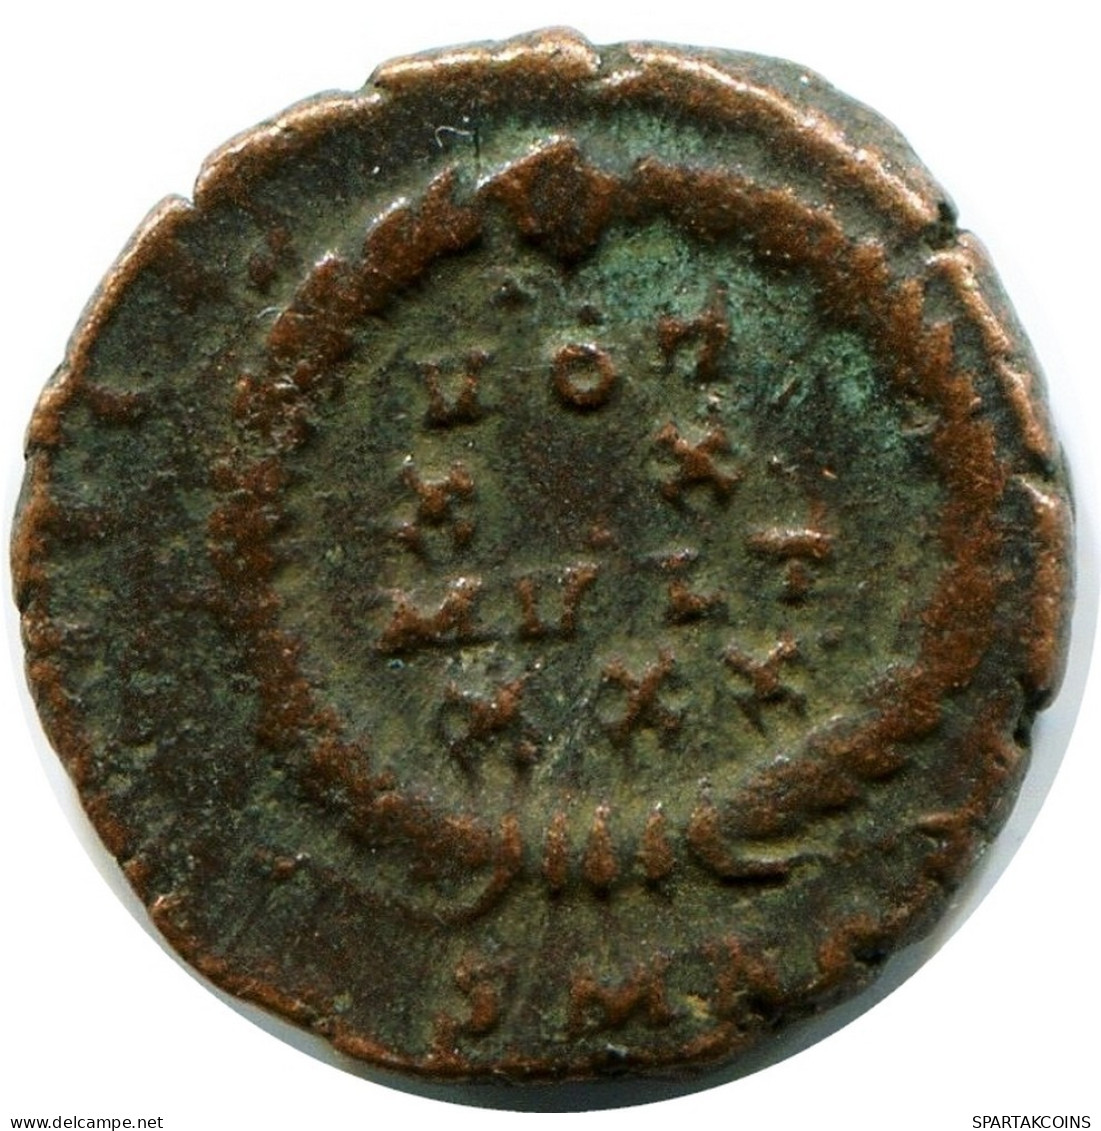 CONSTANS MINTED IN ANTIOCH FOUND IN IHNASYAH HOARD EGYPT #ANC11803.14.D.A - L'Empire Chrétien (307 à 363)